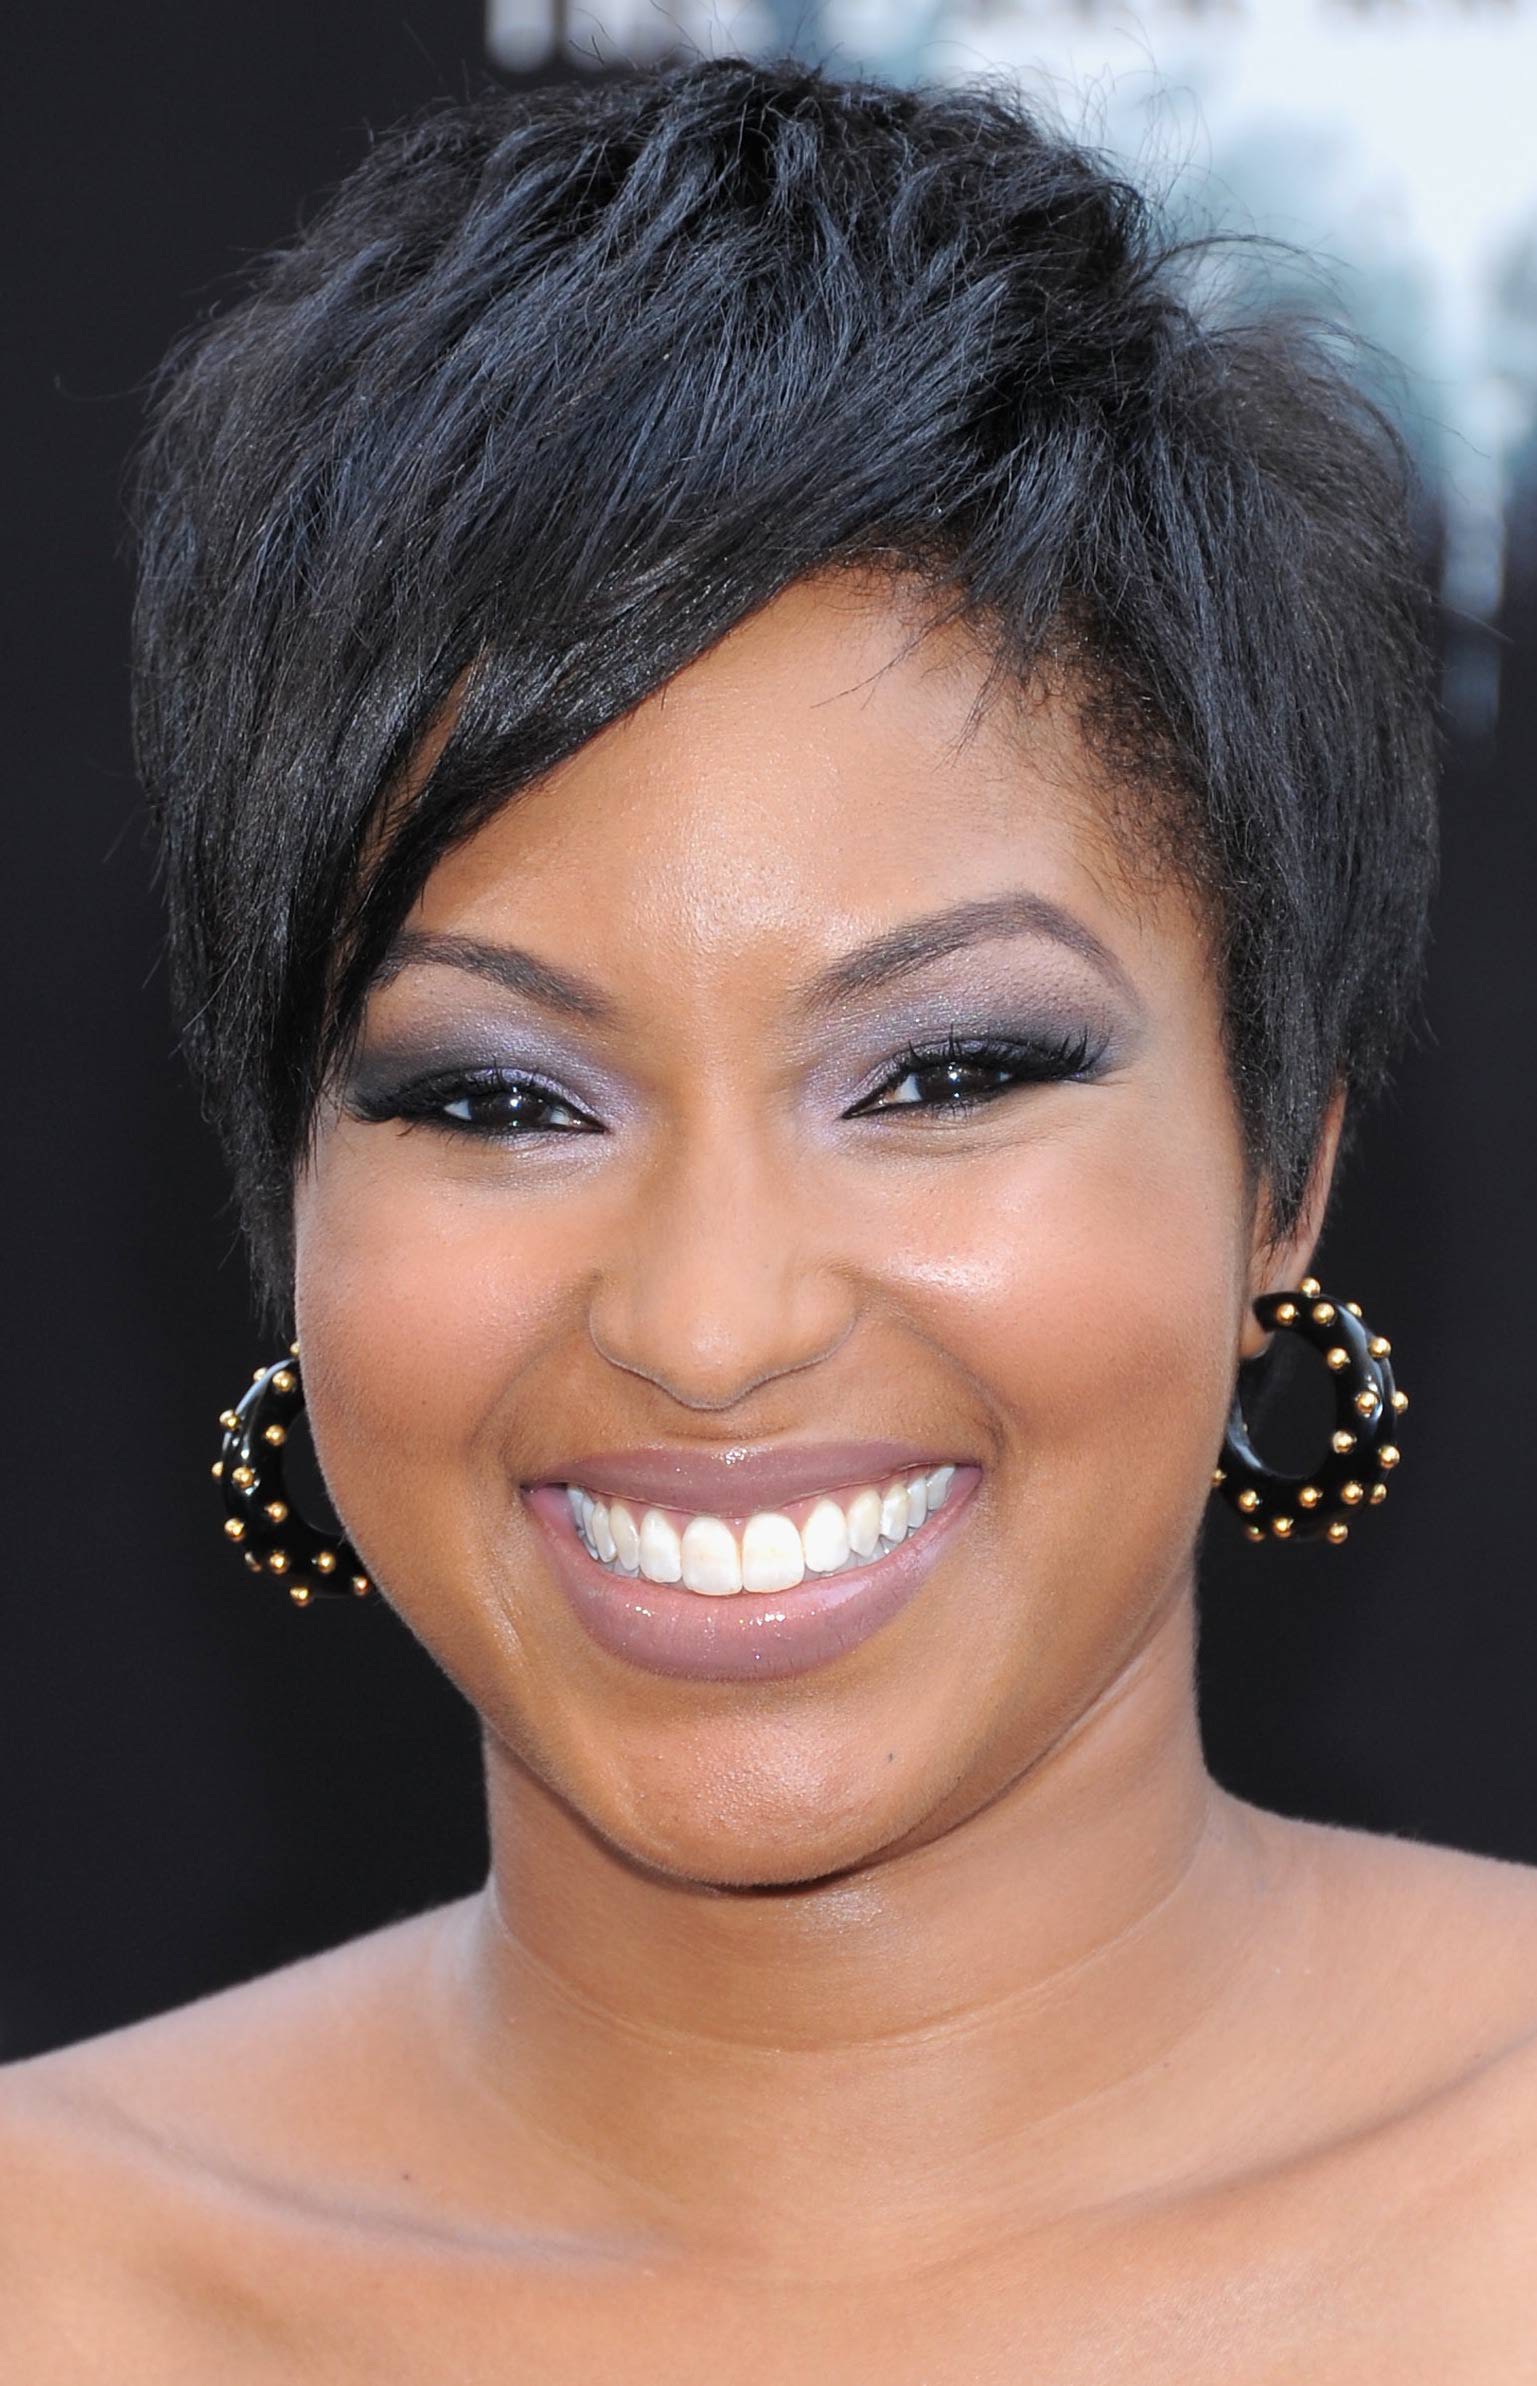 Pixie Haircut Ideas for Black Women – The Style News Network